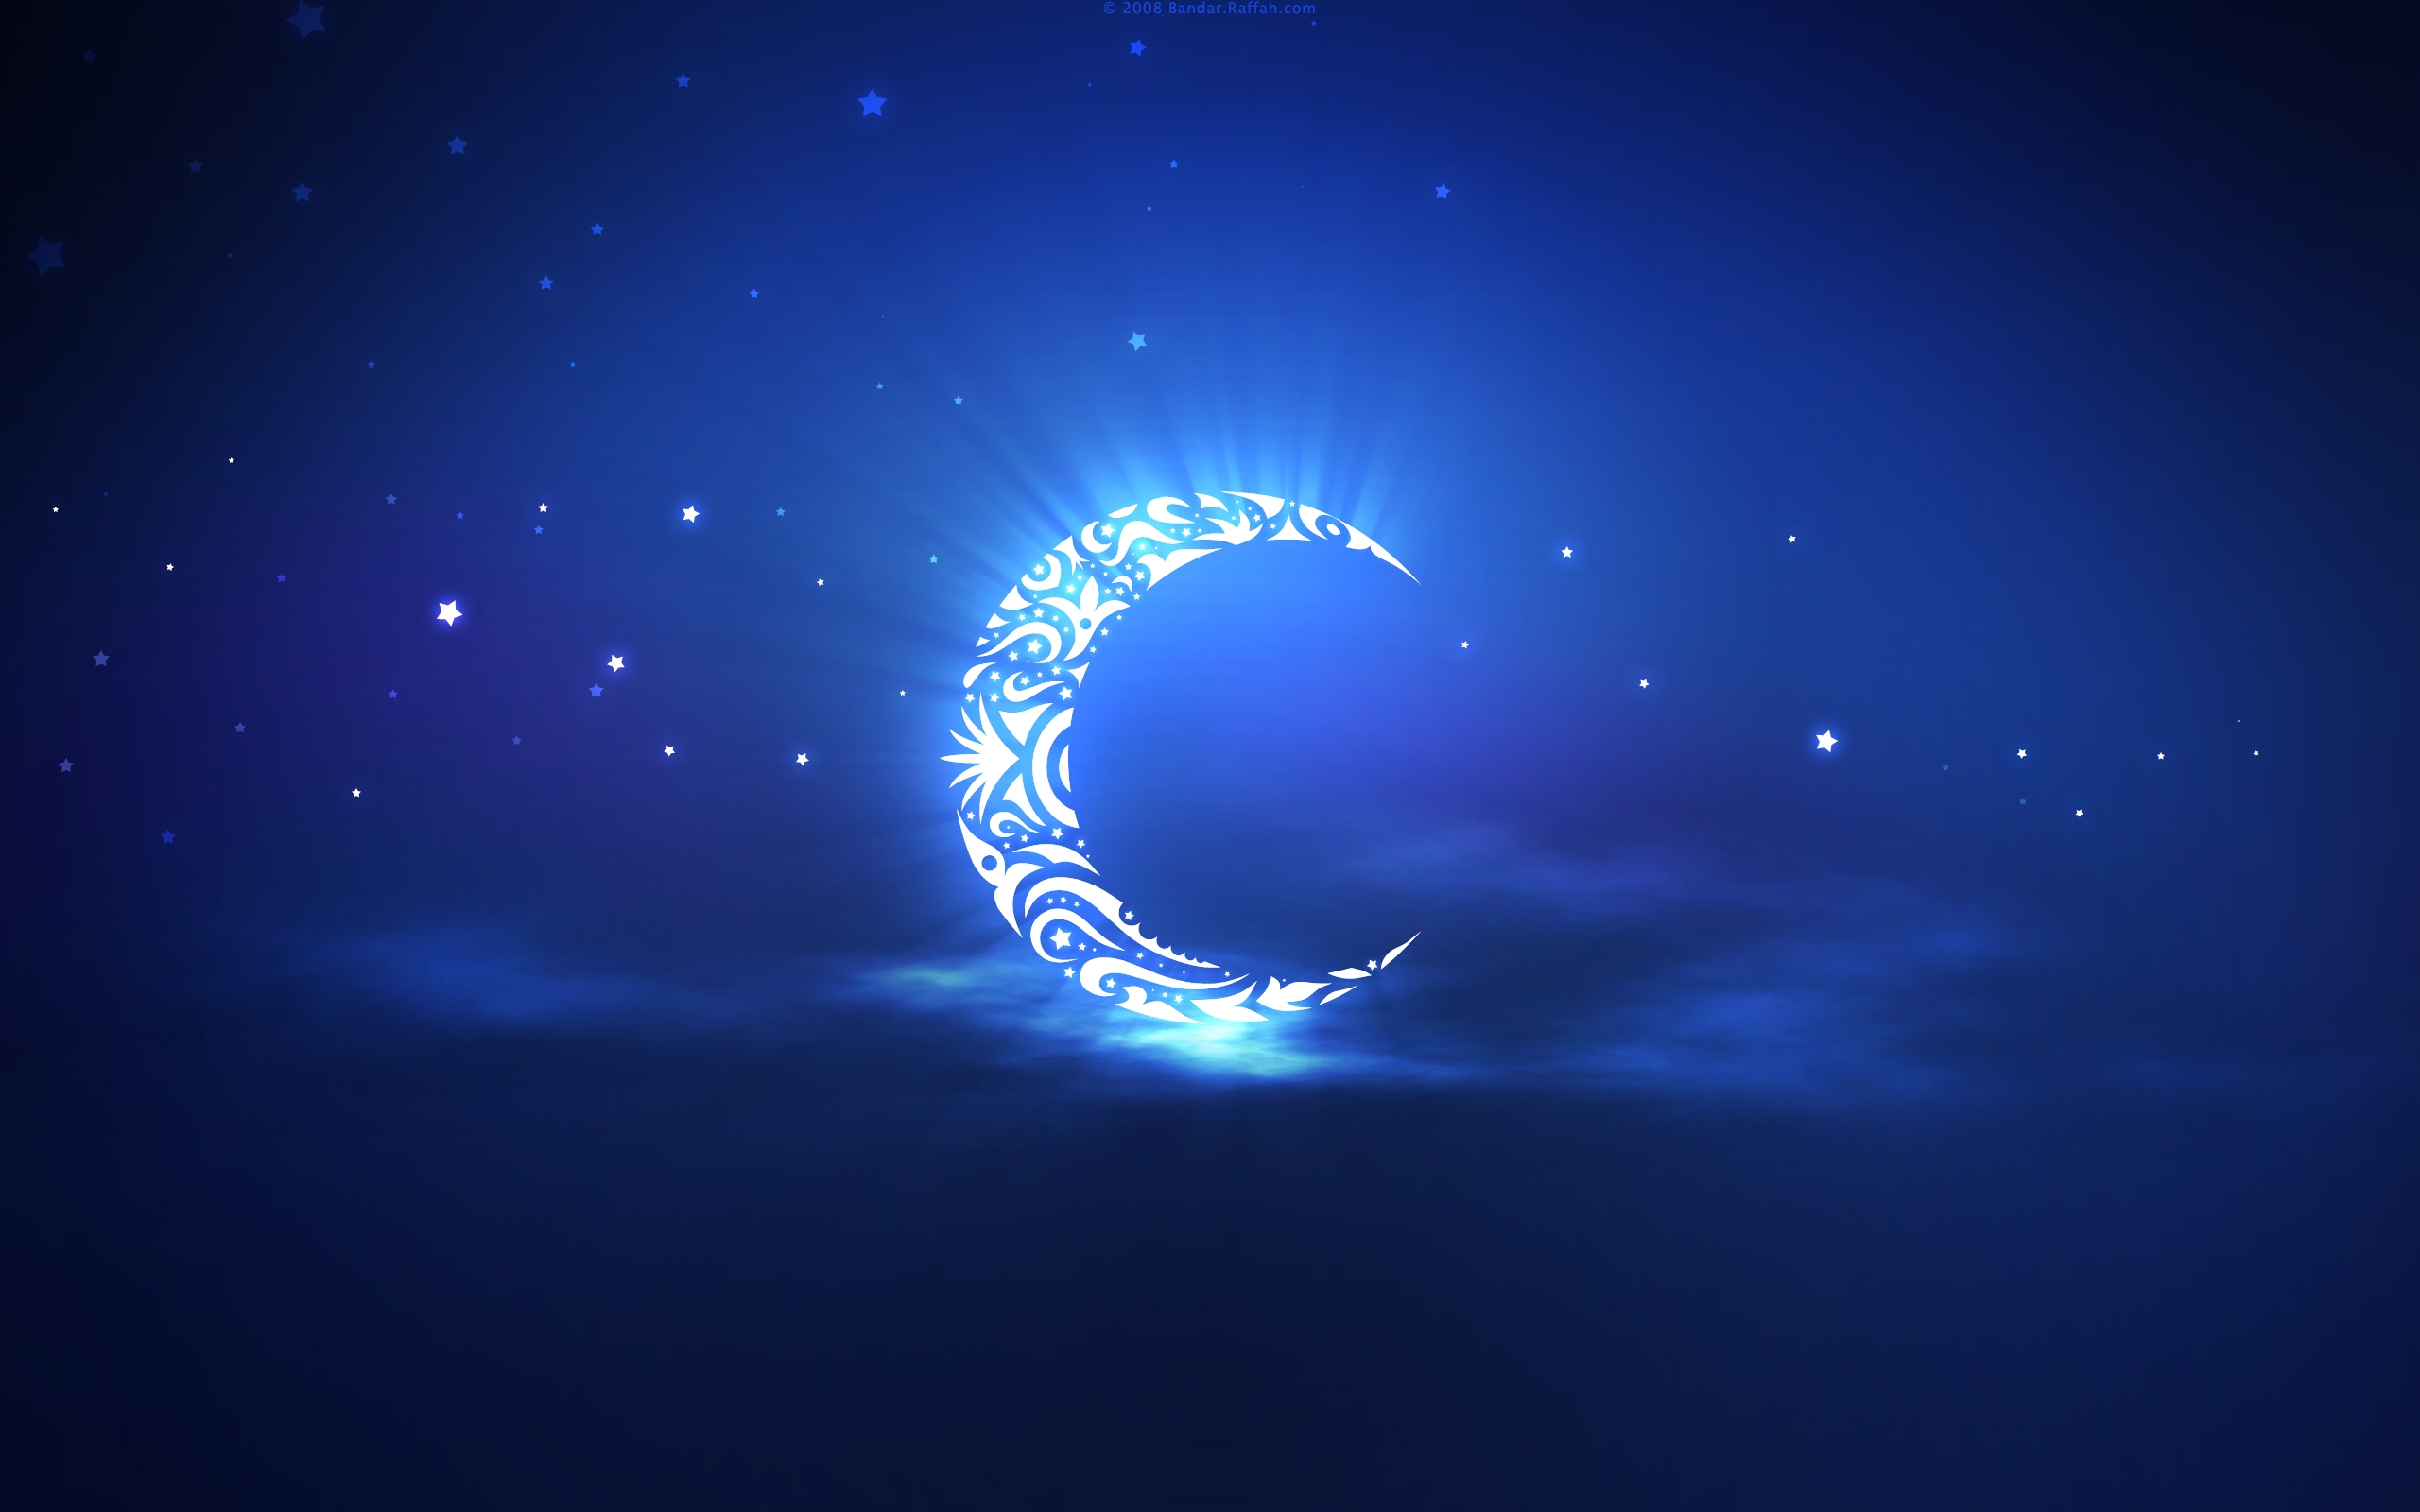 Awesome Crescent Moon Cool Wallpaper Share This On